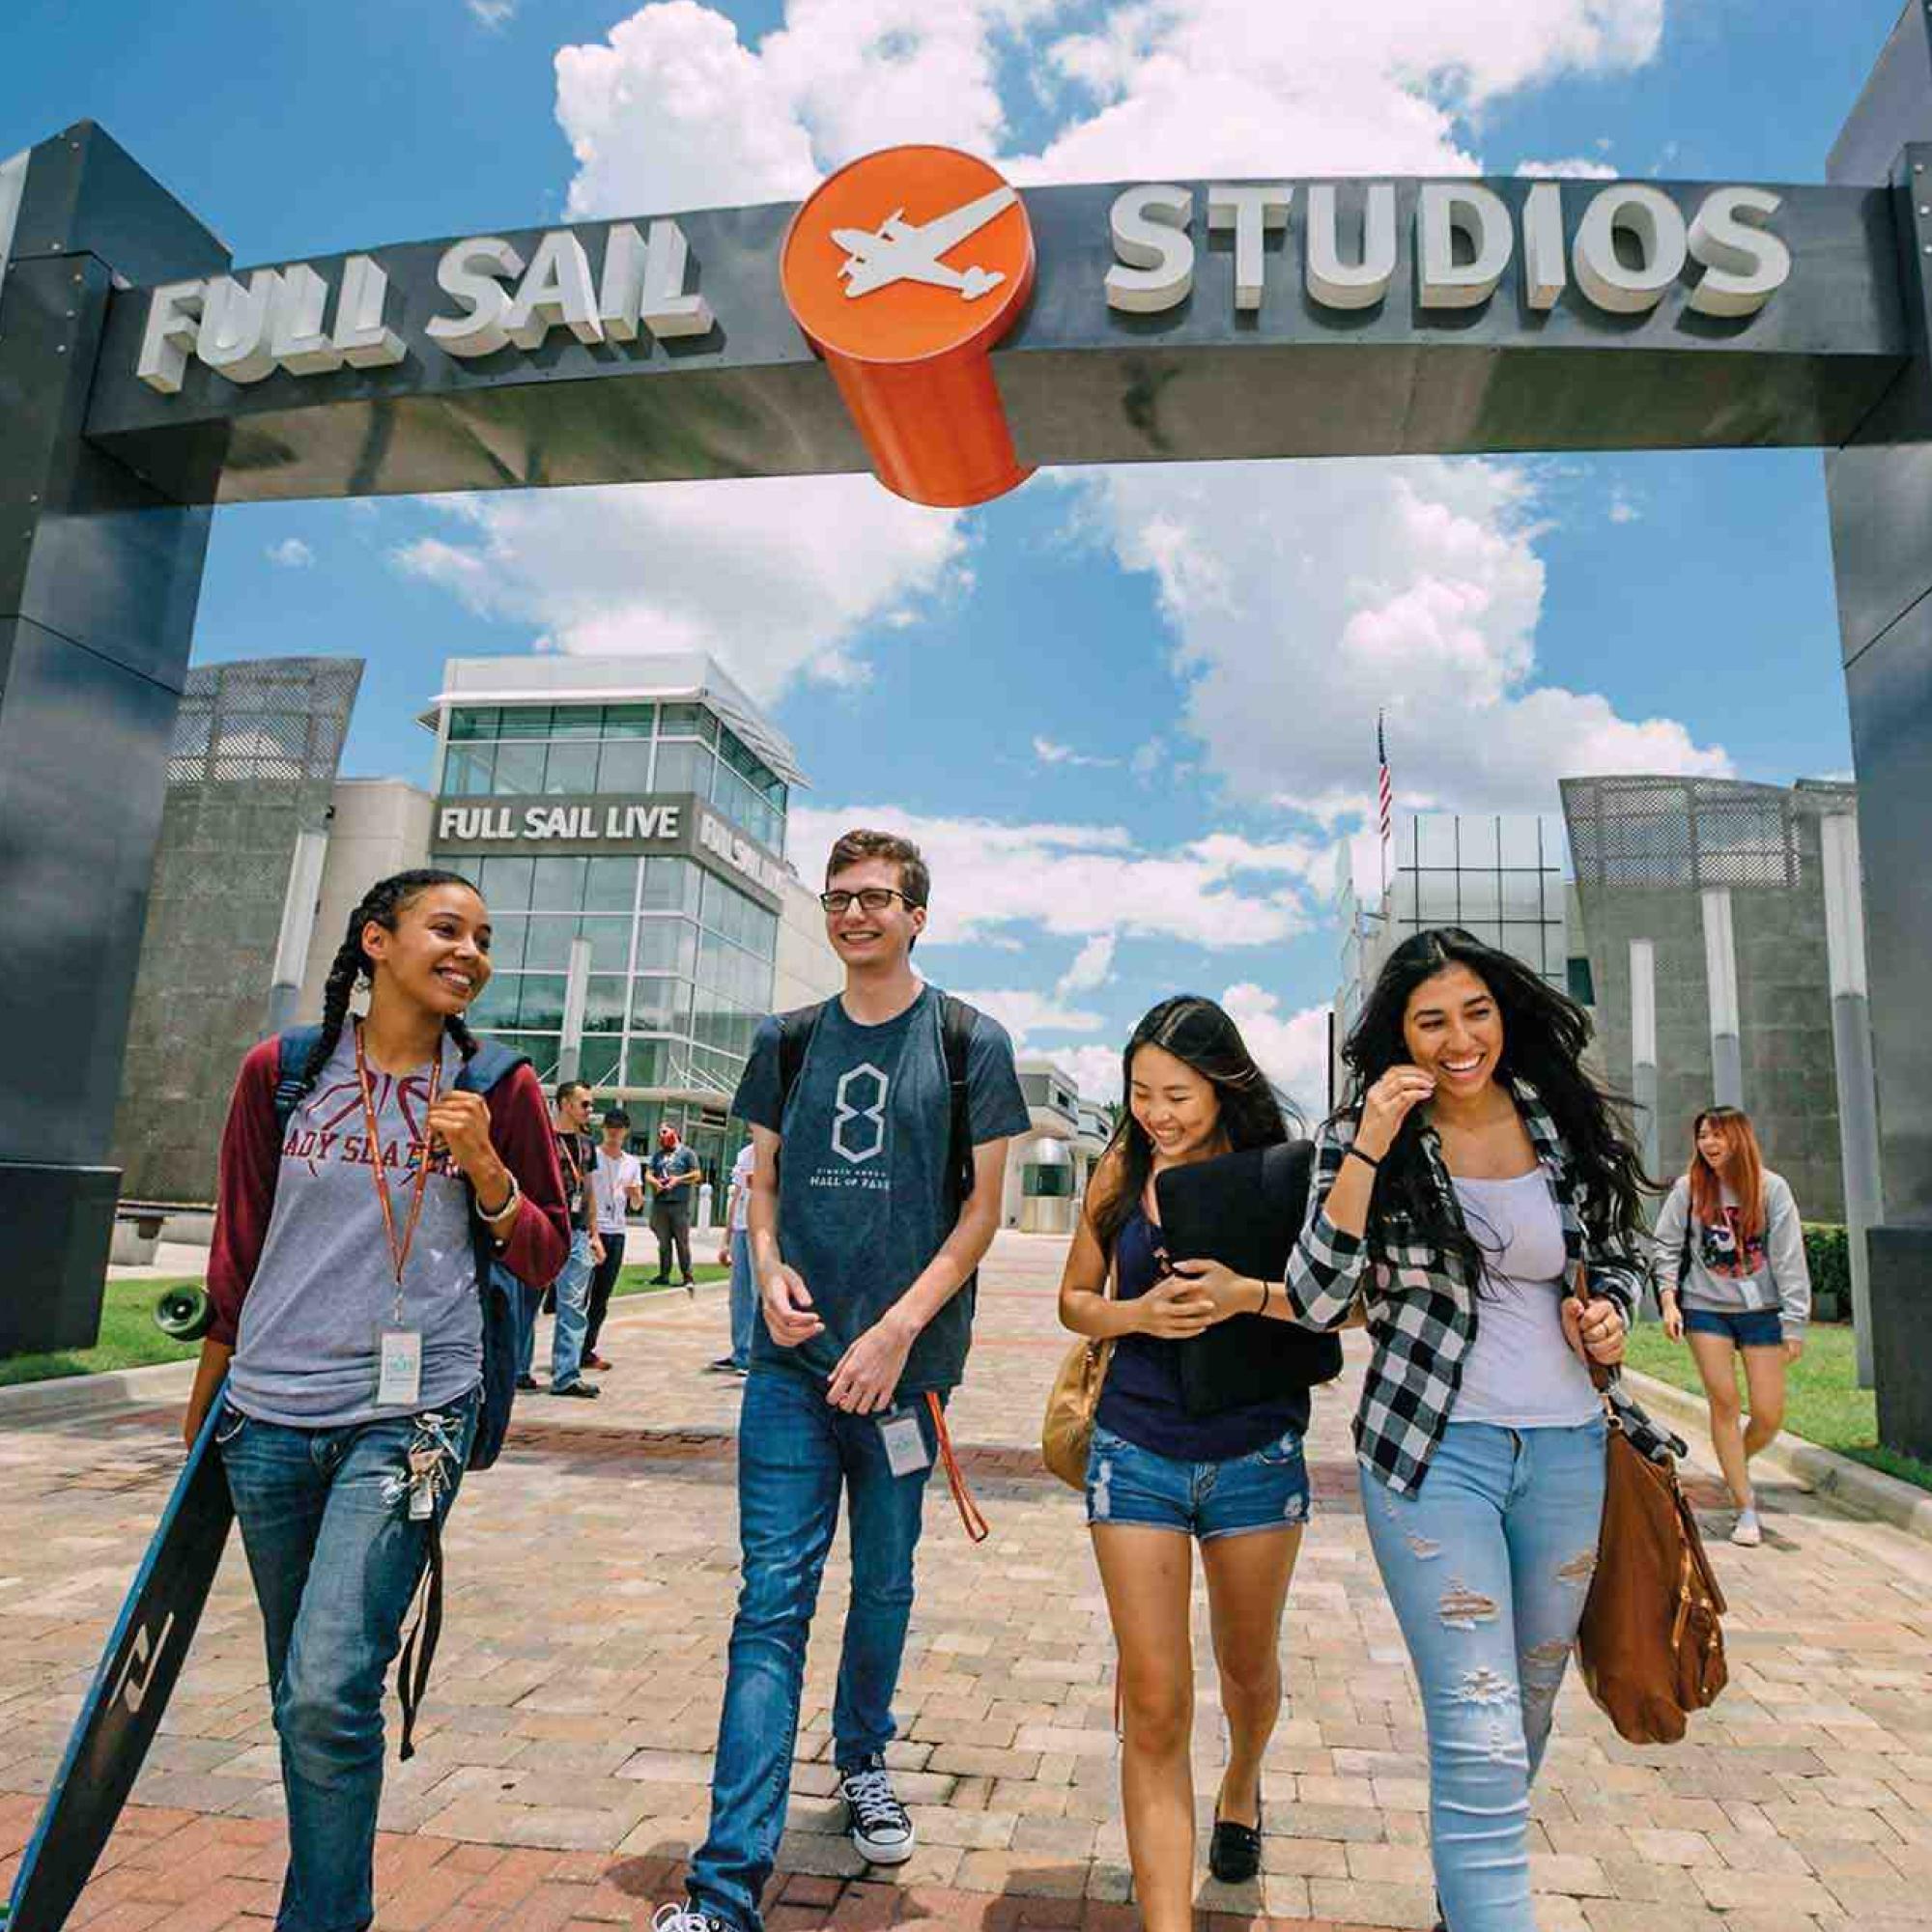 On a bright, sunny campus beneath the Full Sail Studios archway, a group of students with backpacks laugh and walk together.